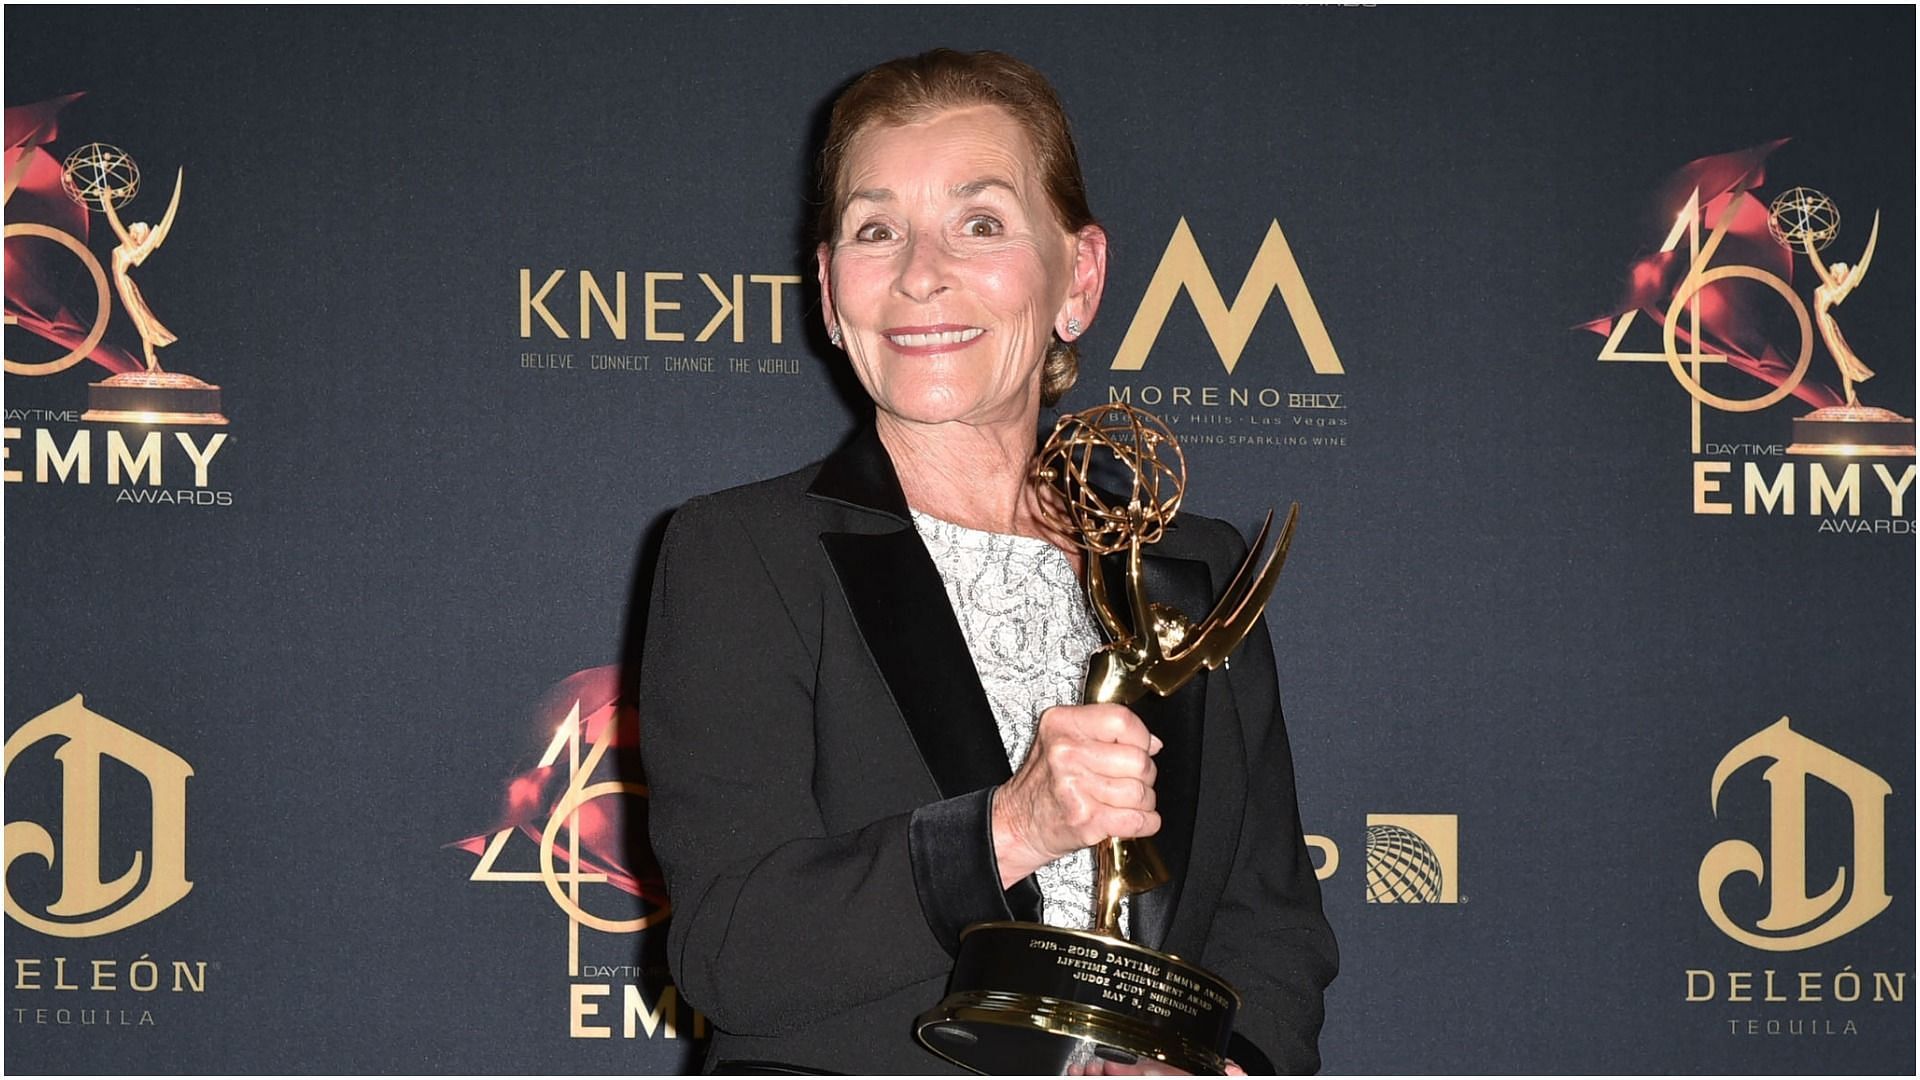 Judy Sheindlin, with her Lifetime Achievement Award, attends the 46th Annual Daytime Emmy Awards on May 05, 2019 in Pasadena, California (Image via Getty Images)